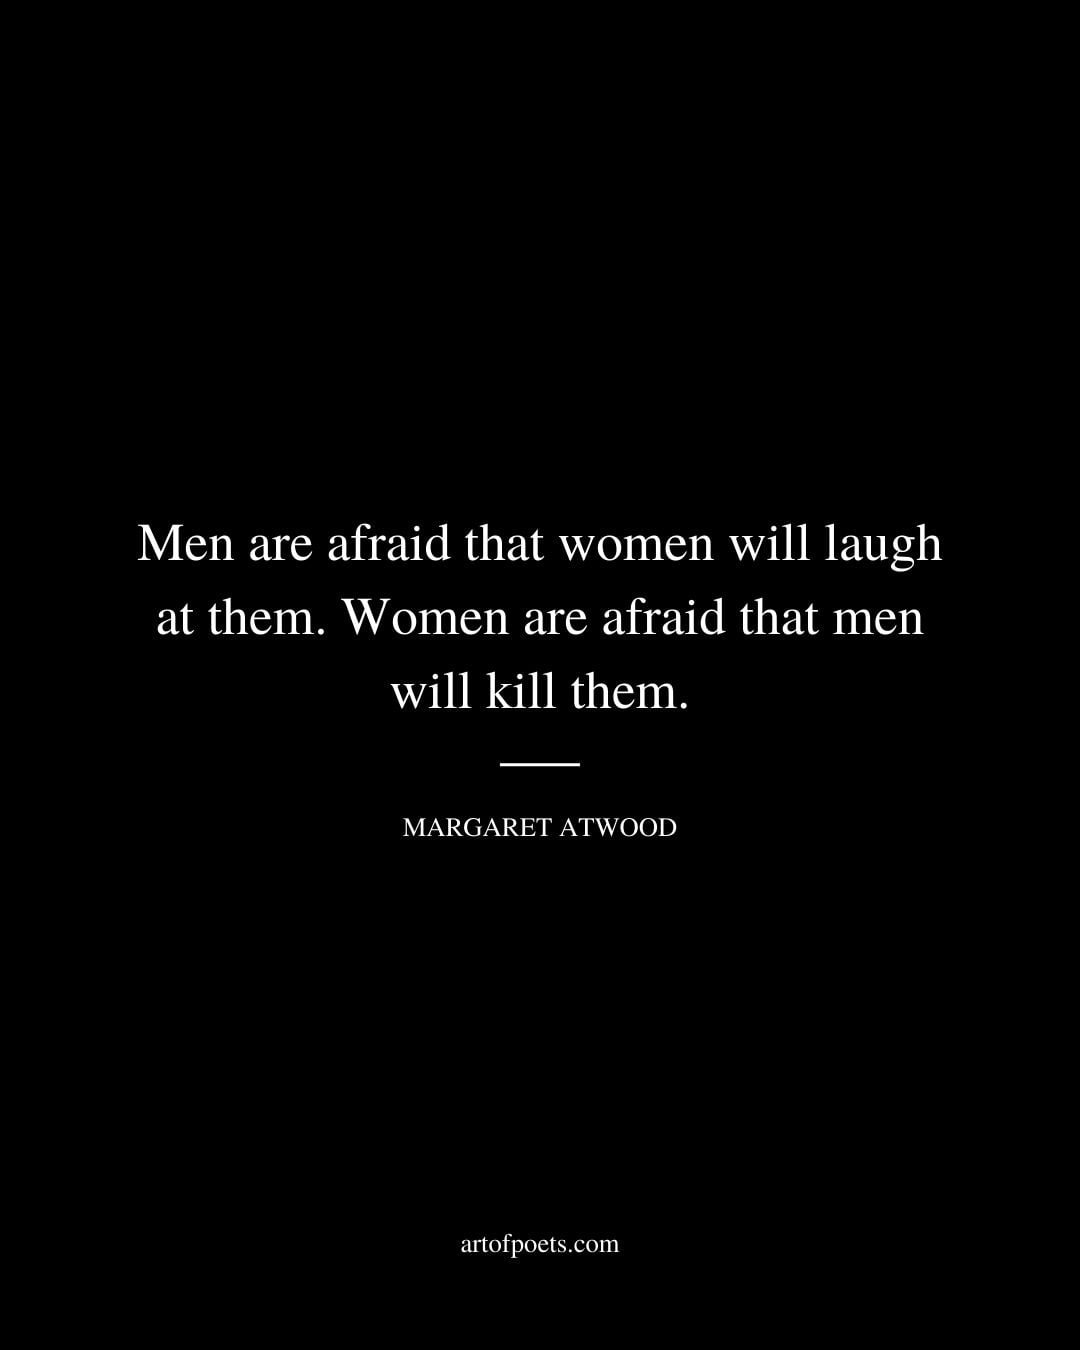 Men are afraid that women will laugh at them. Women are afraid that men will kill them